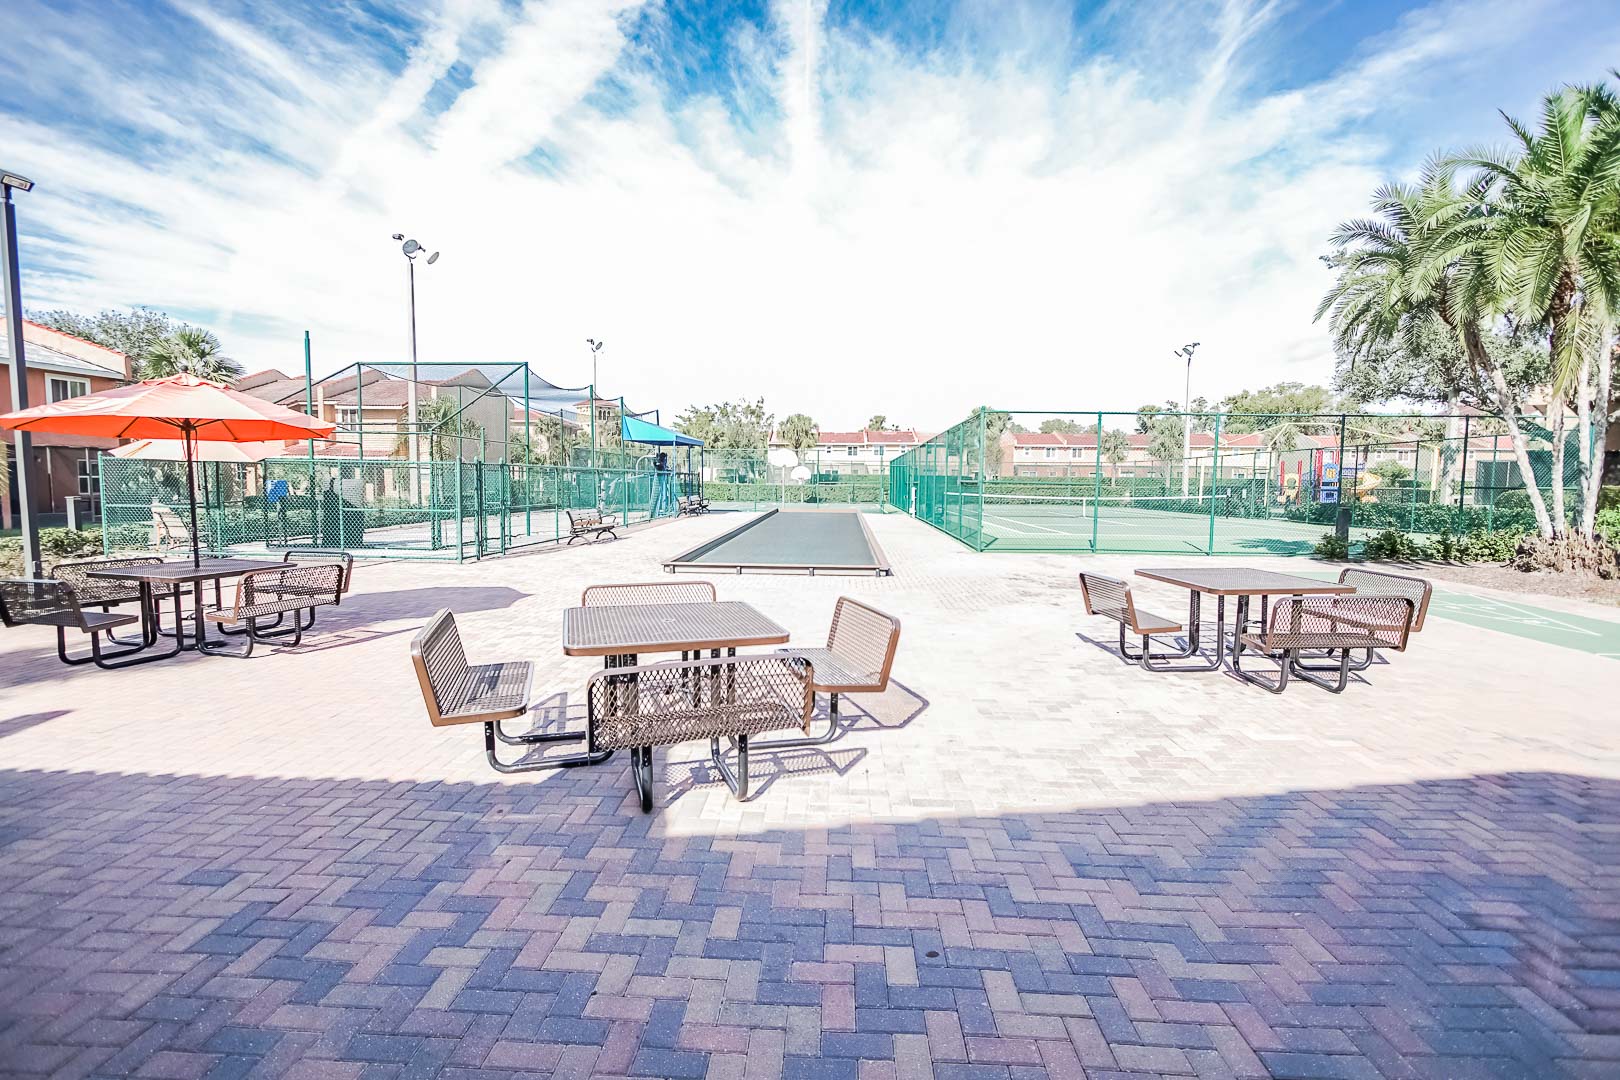 An airy view of the tennis courts and seating area at VRI's Fantasy World Resort in Florida.